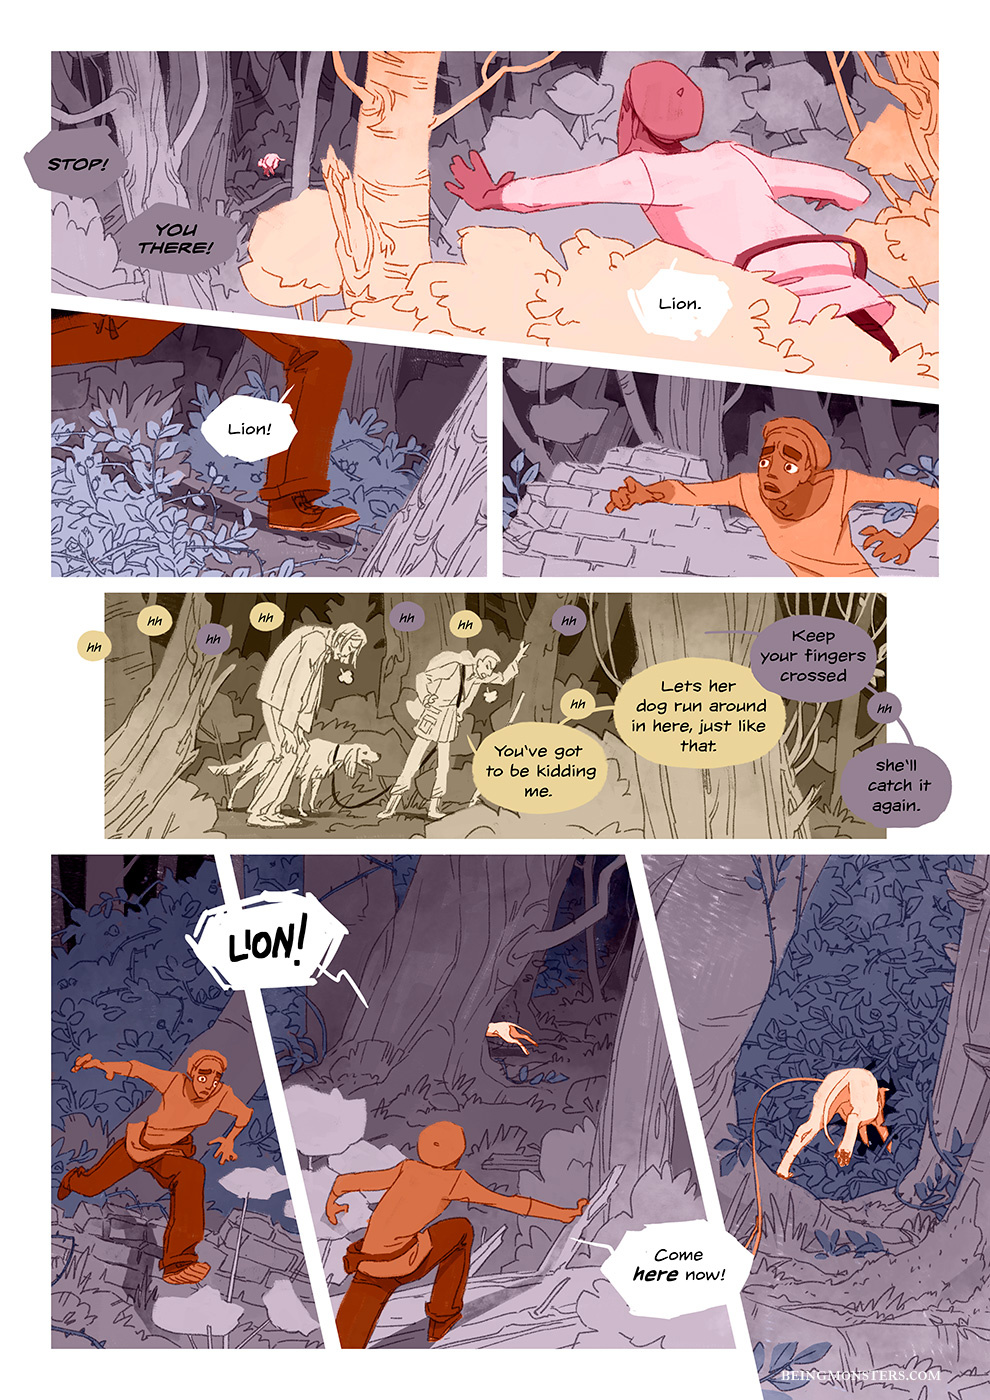 Being Monsters Book 1 Chapter 2 page 23 EN